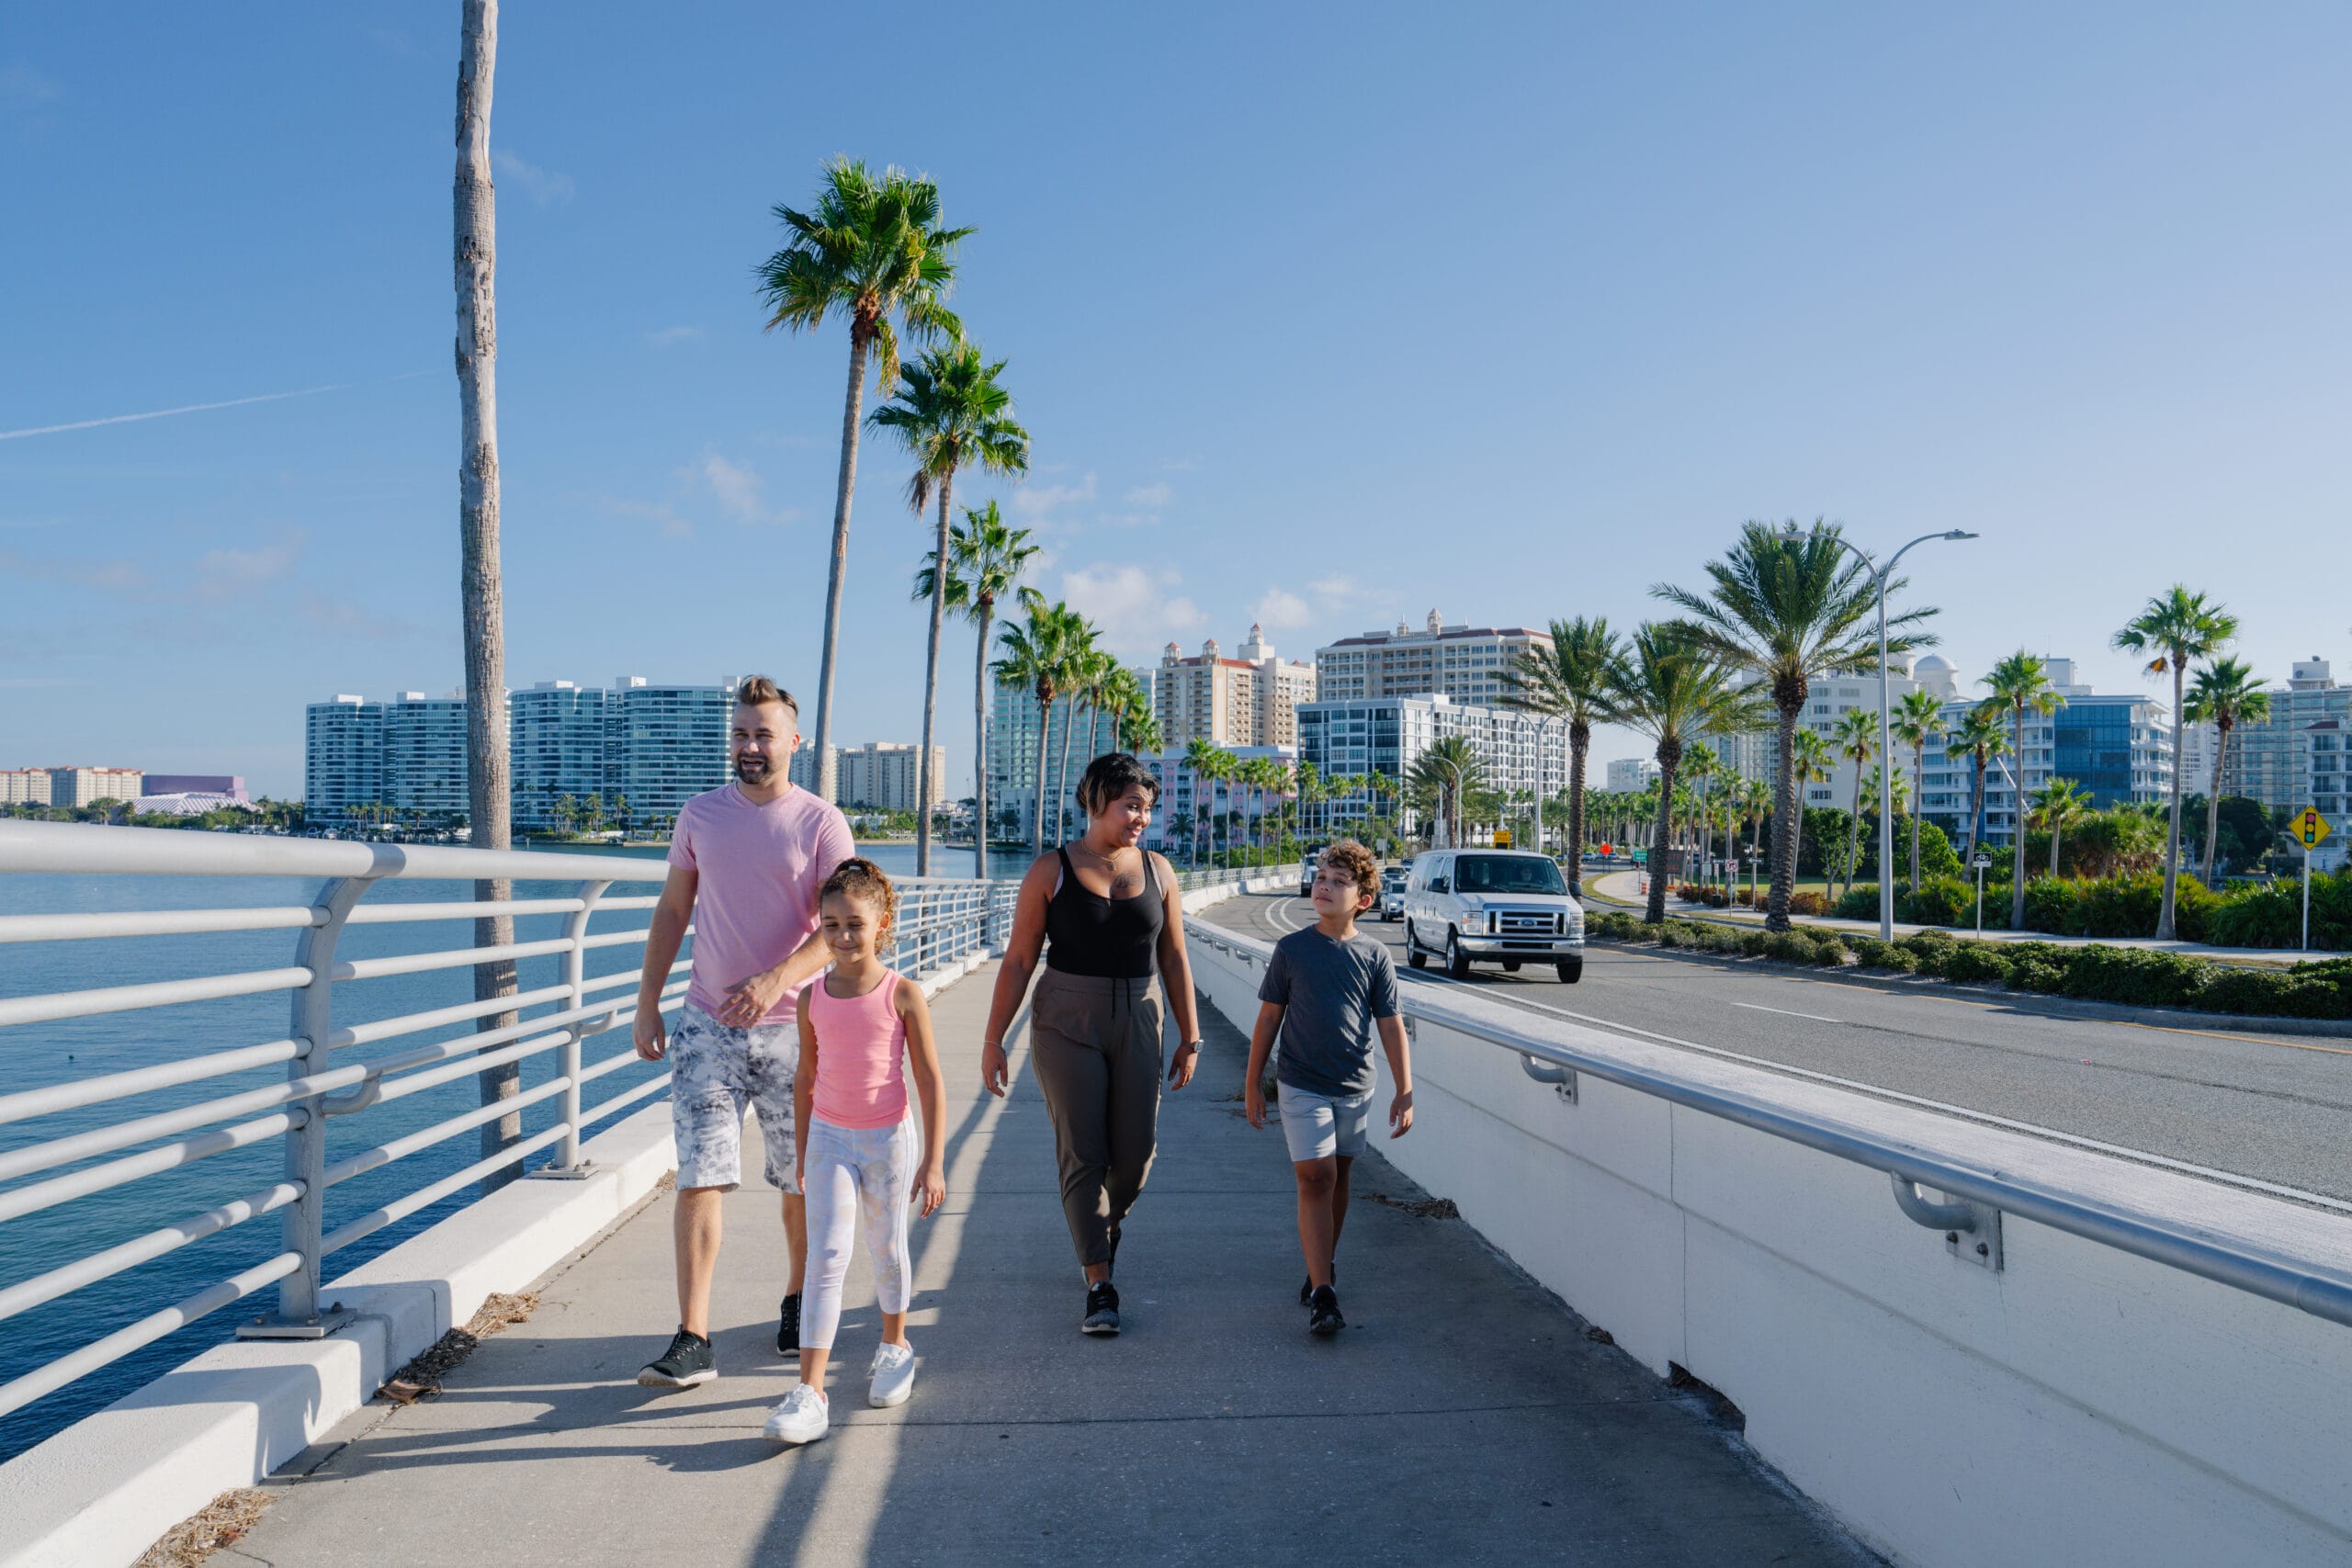 A family walks along a boardwalk with palm trees in the background.